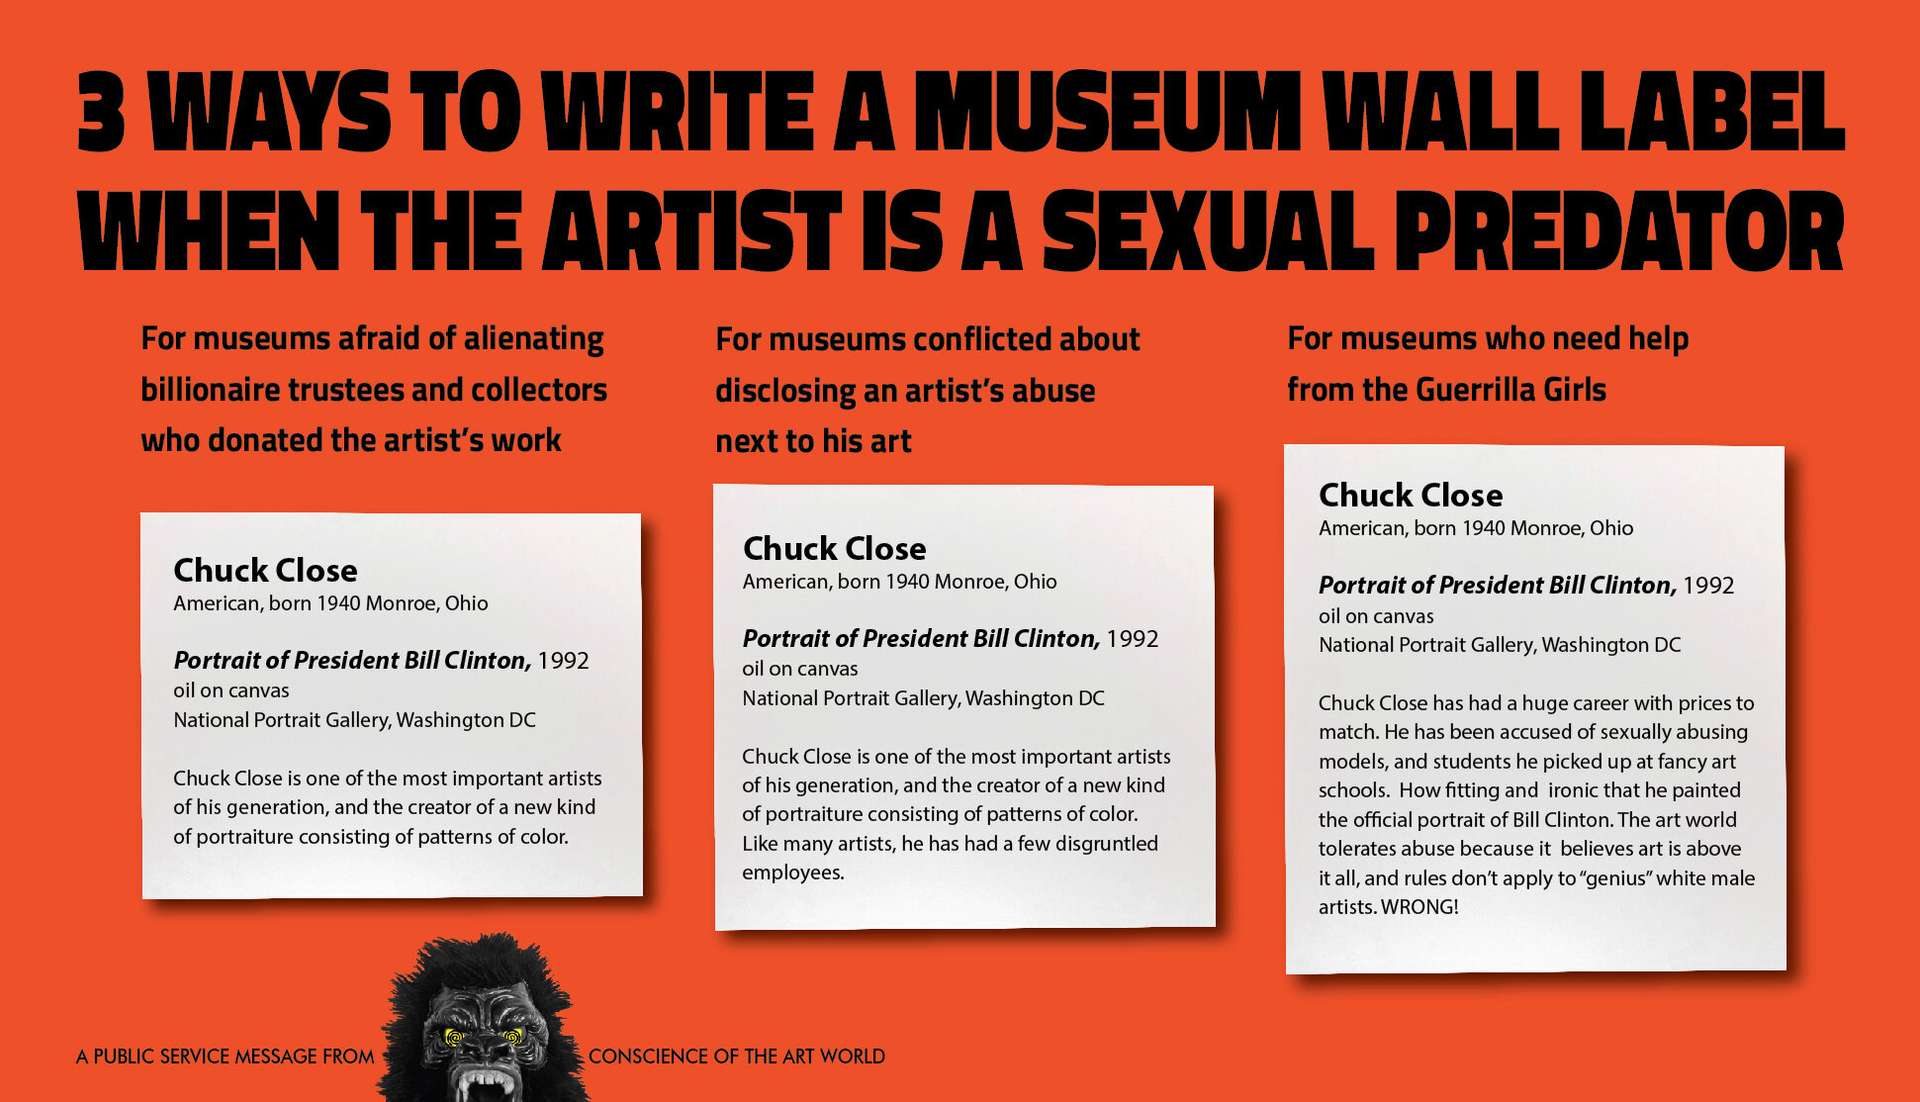 An image of a poster by the Guerrilla Girls, showing three different ways of rewriting museum labels addressing Chuck Close's scandal.